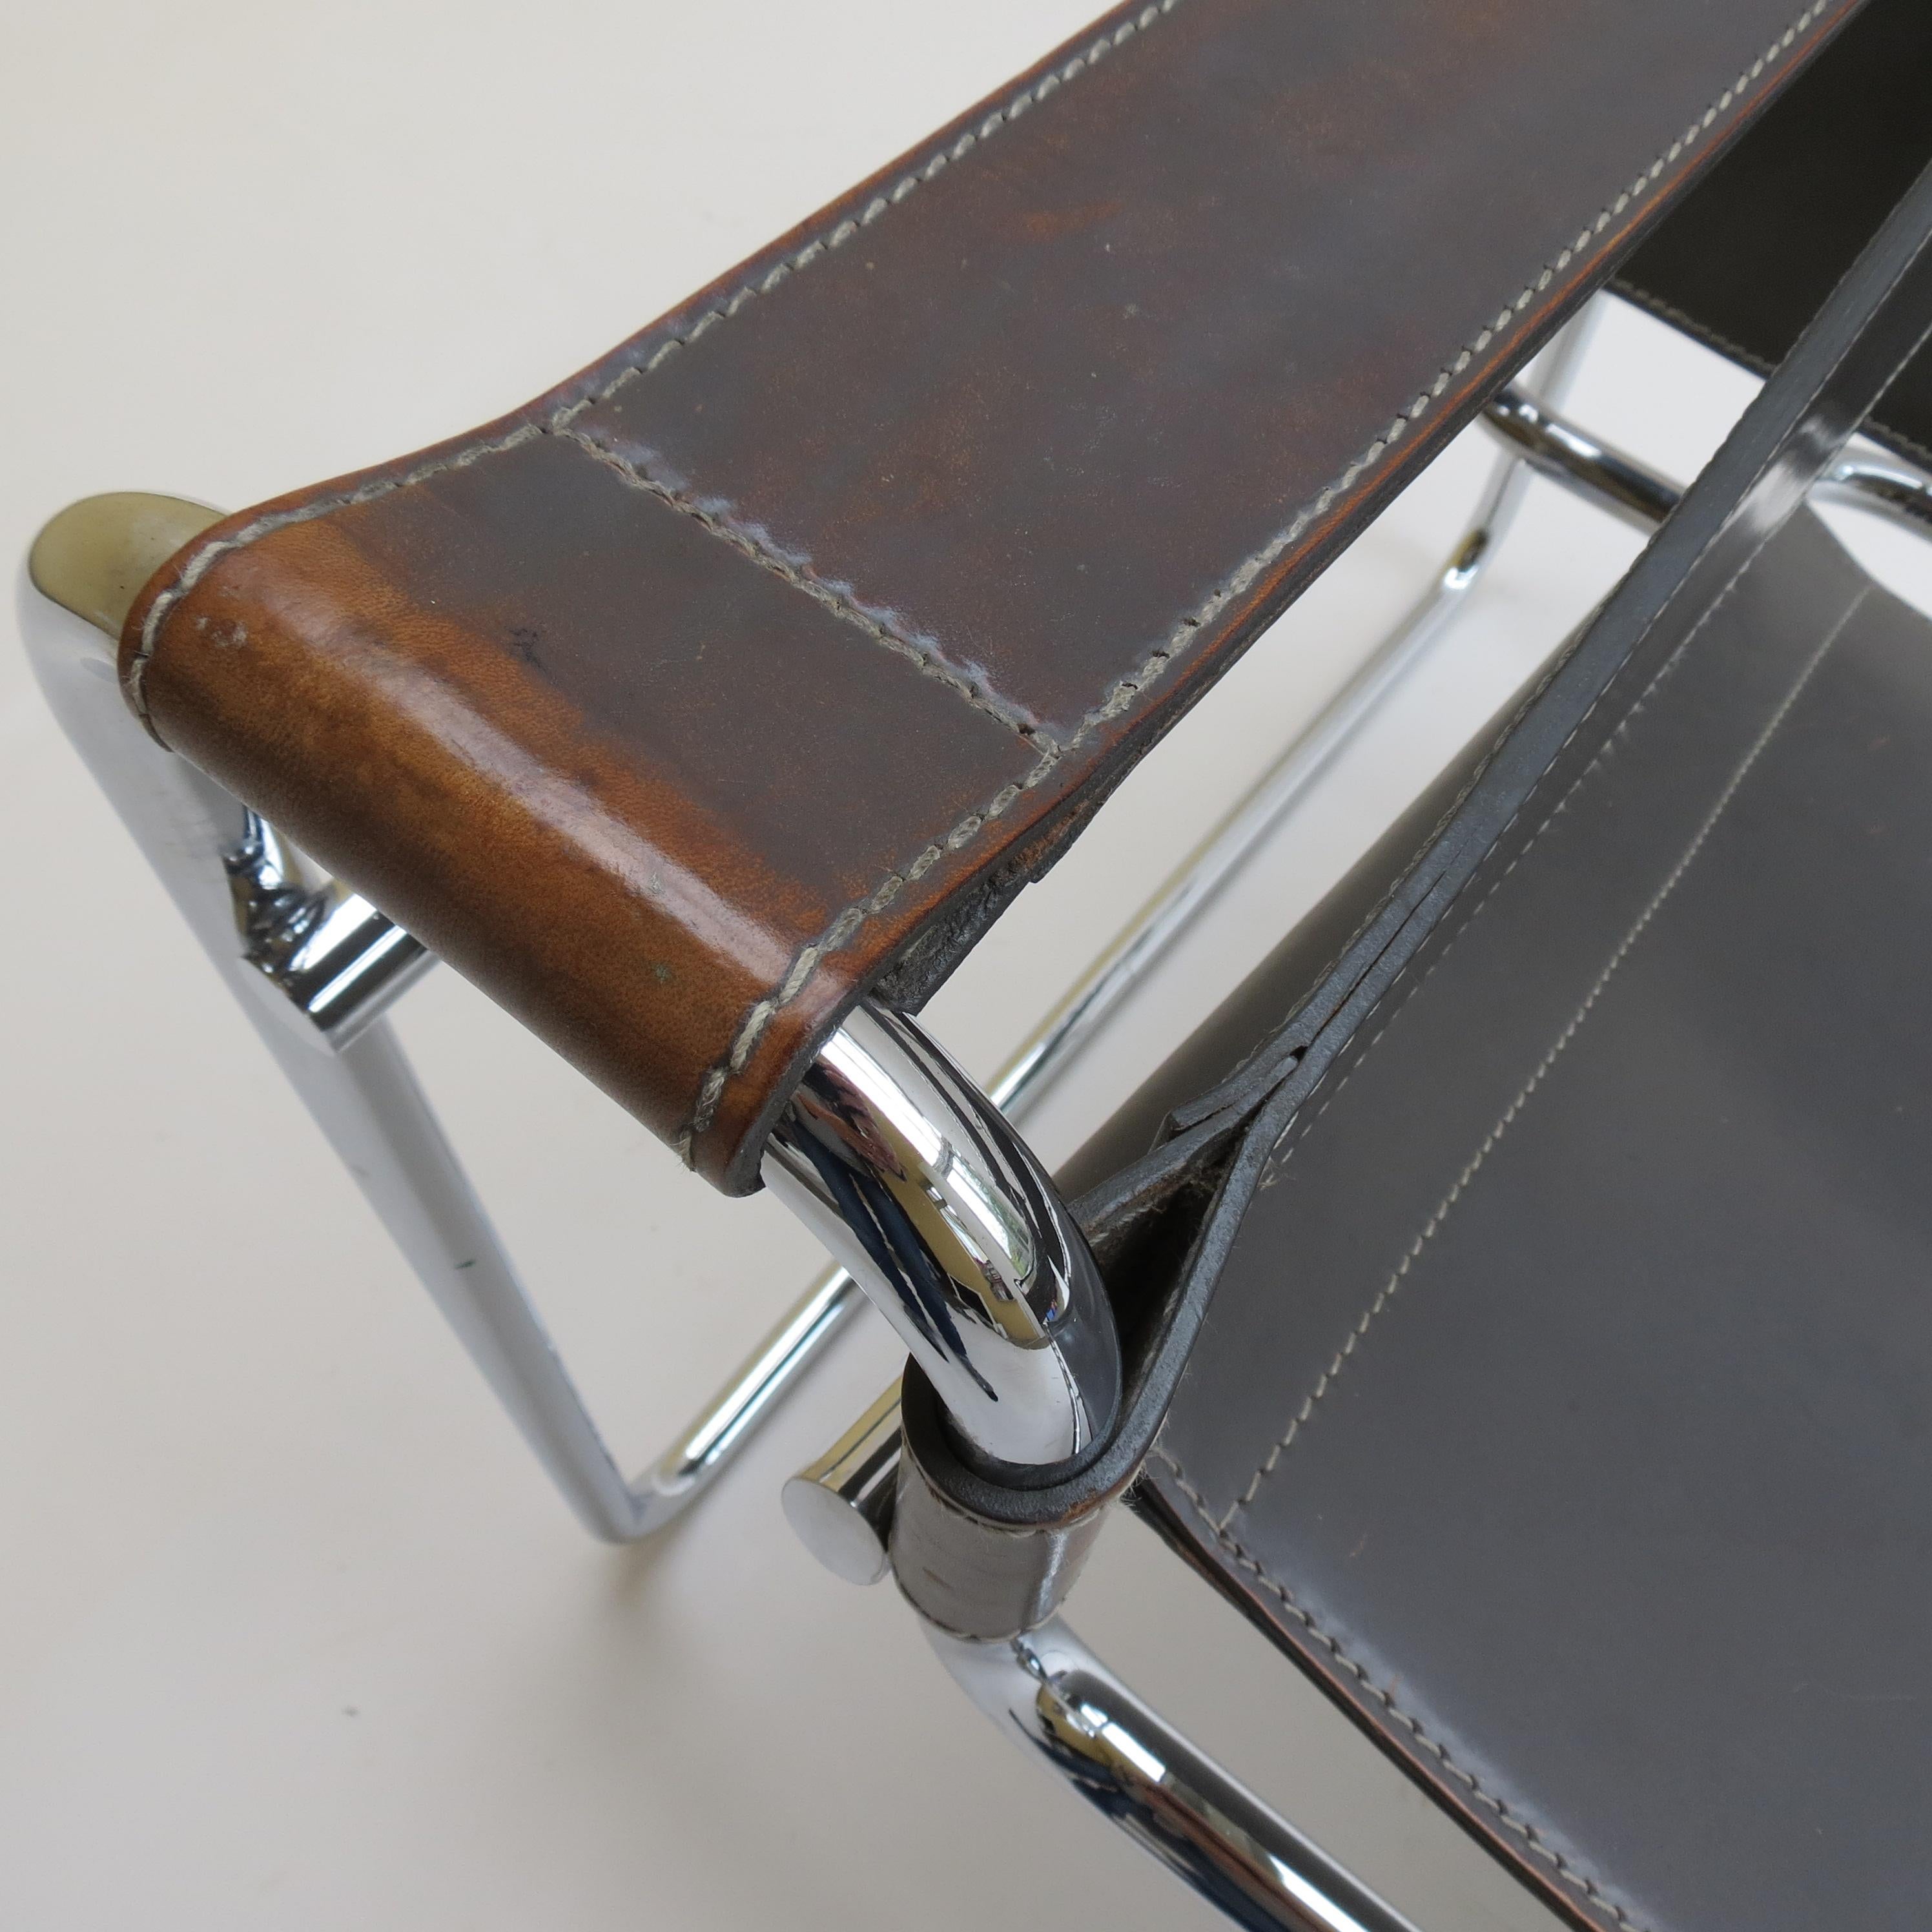 Wassily chair designed by Marcel Breuer and manufactured by Knoll. The original year of design of this chair was 1925, this particular chair was manufactured in 1985.

Made from polished chrome tube with leather seat and arms. There is Wear and